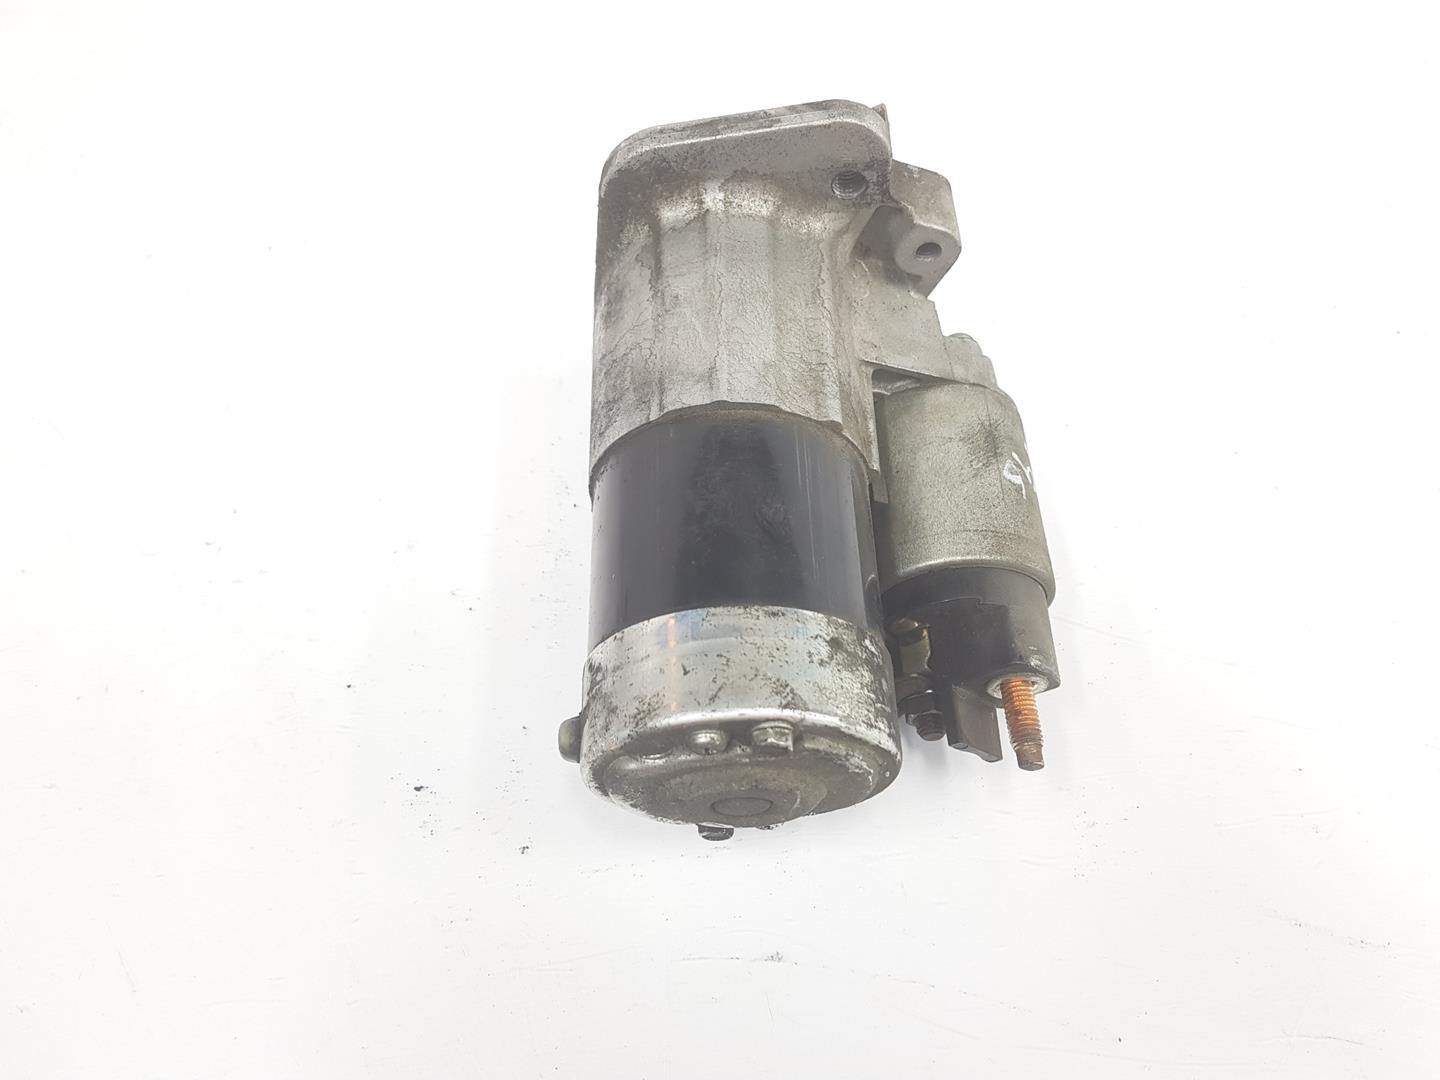 RENAULT Scenic 2 generation (2003-2010) Starter Motor 8200584675A, 8200584675A 20354013